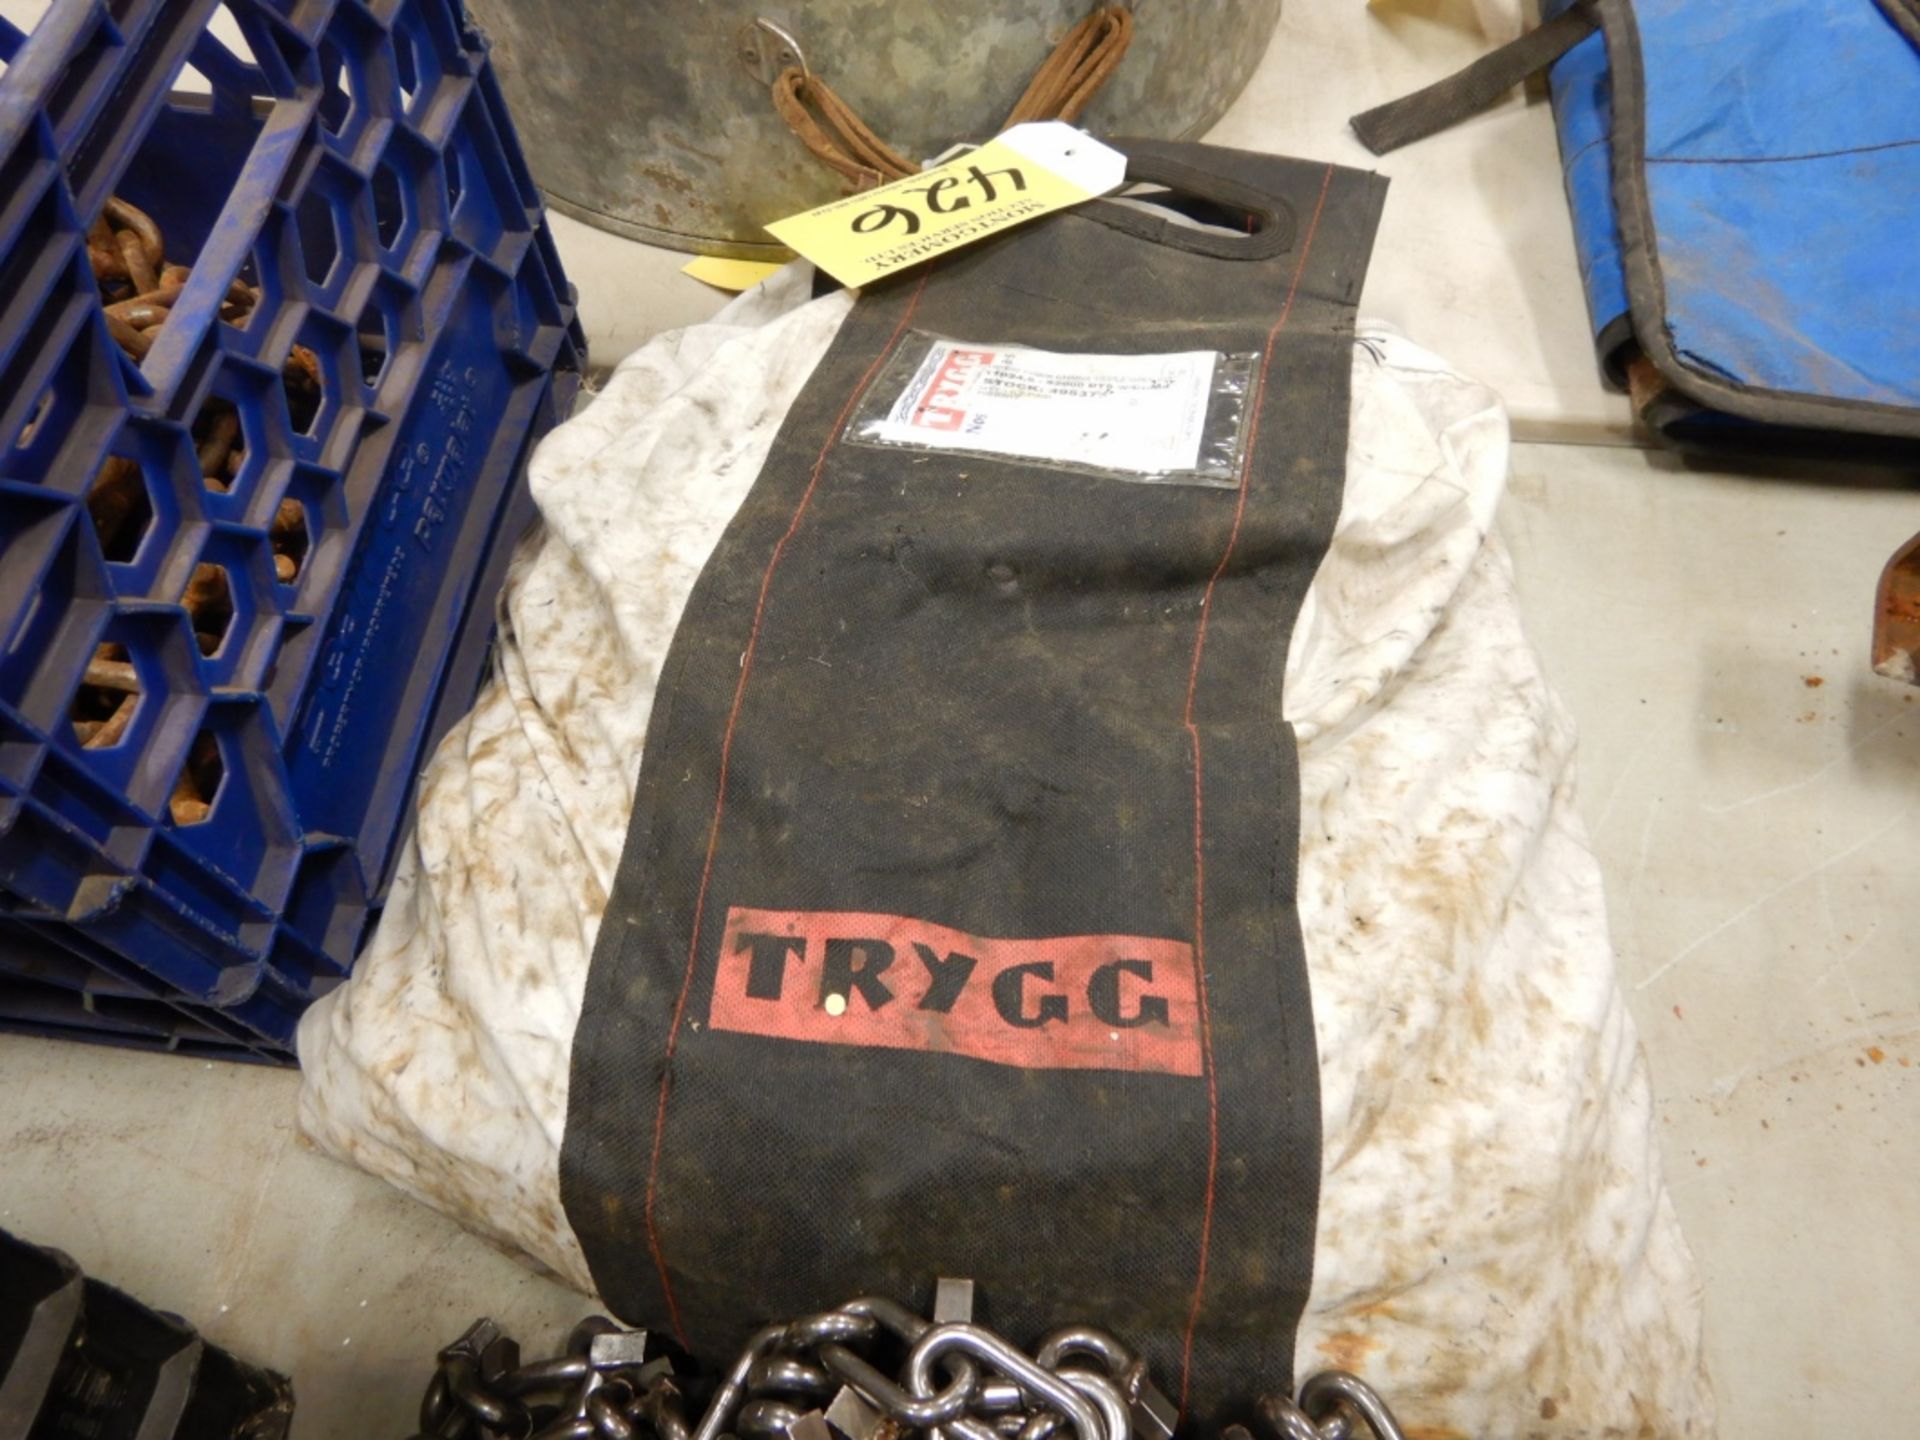 1-SET 2 TRYGG 1124.5 TRUCK CHAINS-TRIPLE RAIL W/CAMS - NEW IN BAG - Image 4 of 4